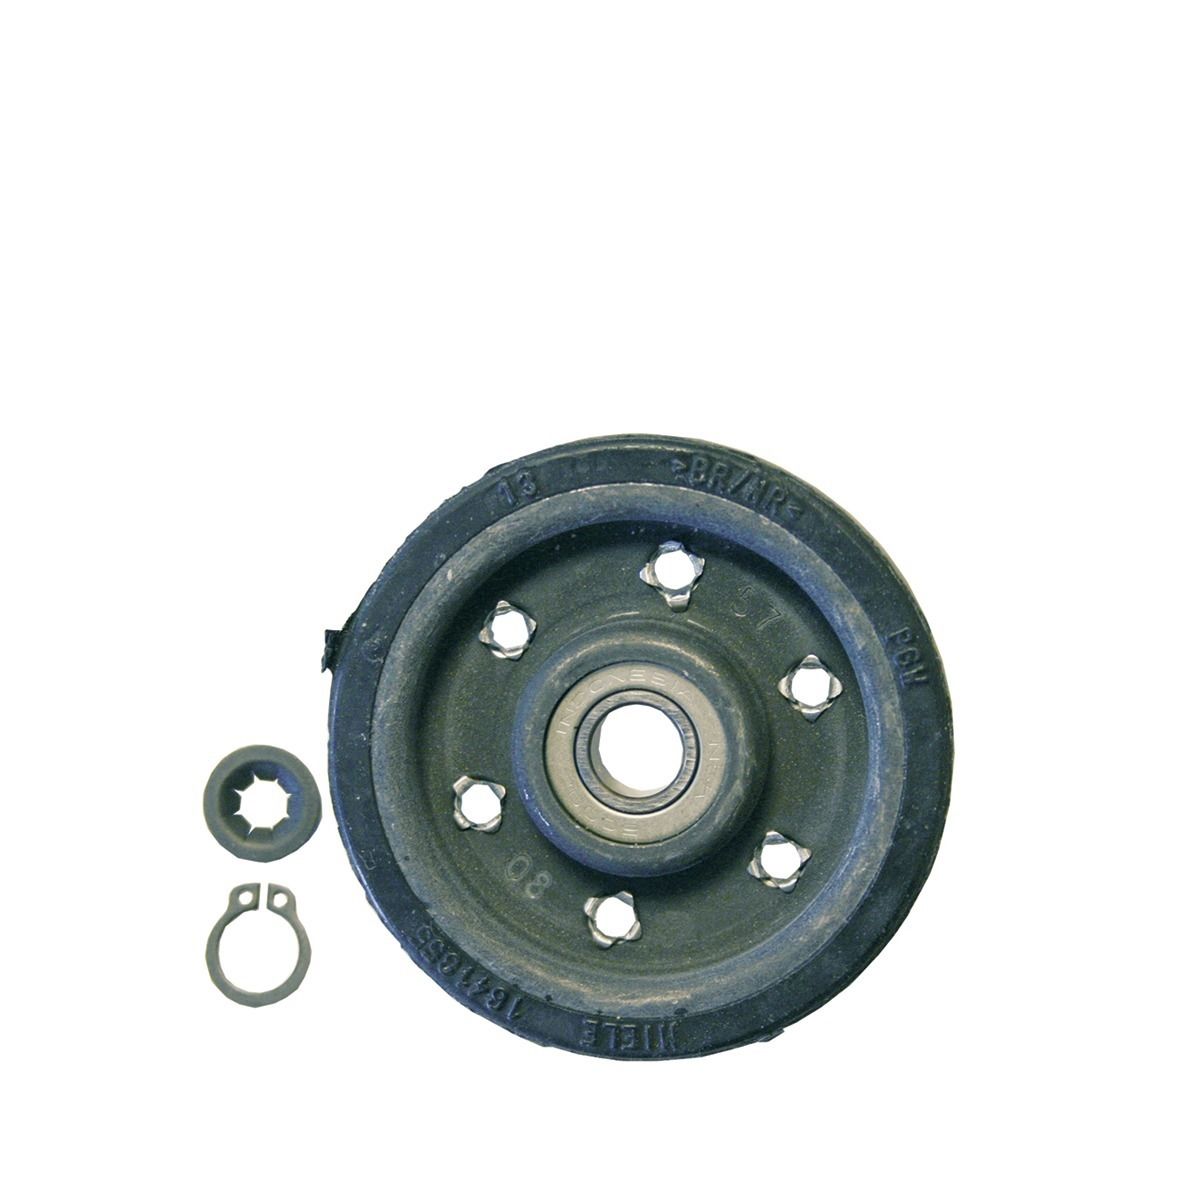 MIELE TUMBLE DRYER DRUM SUPPORT IDLER PULLEYS 1715624 GENUINE PA